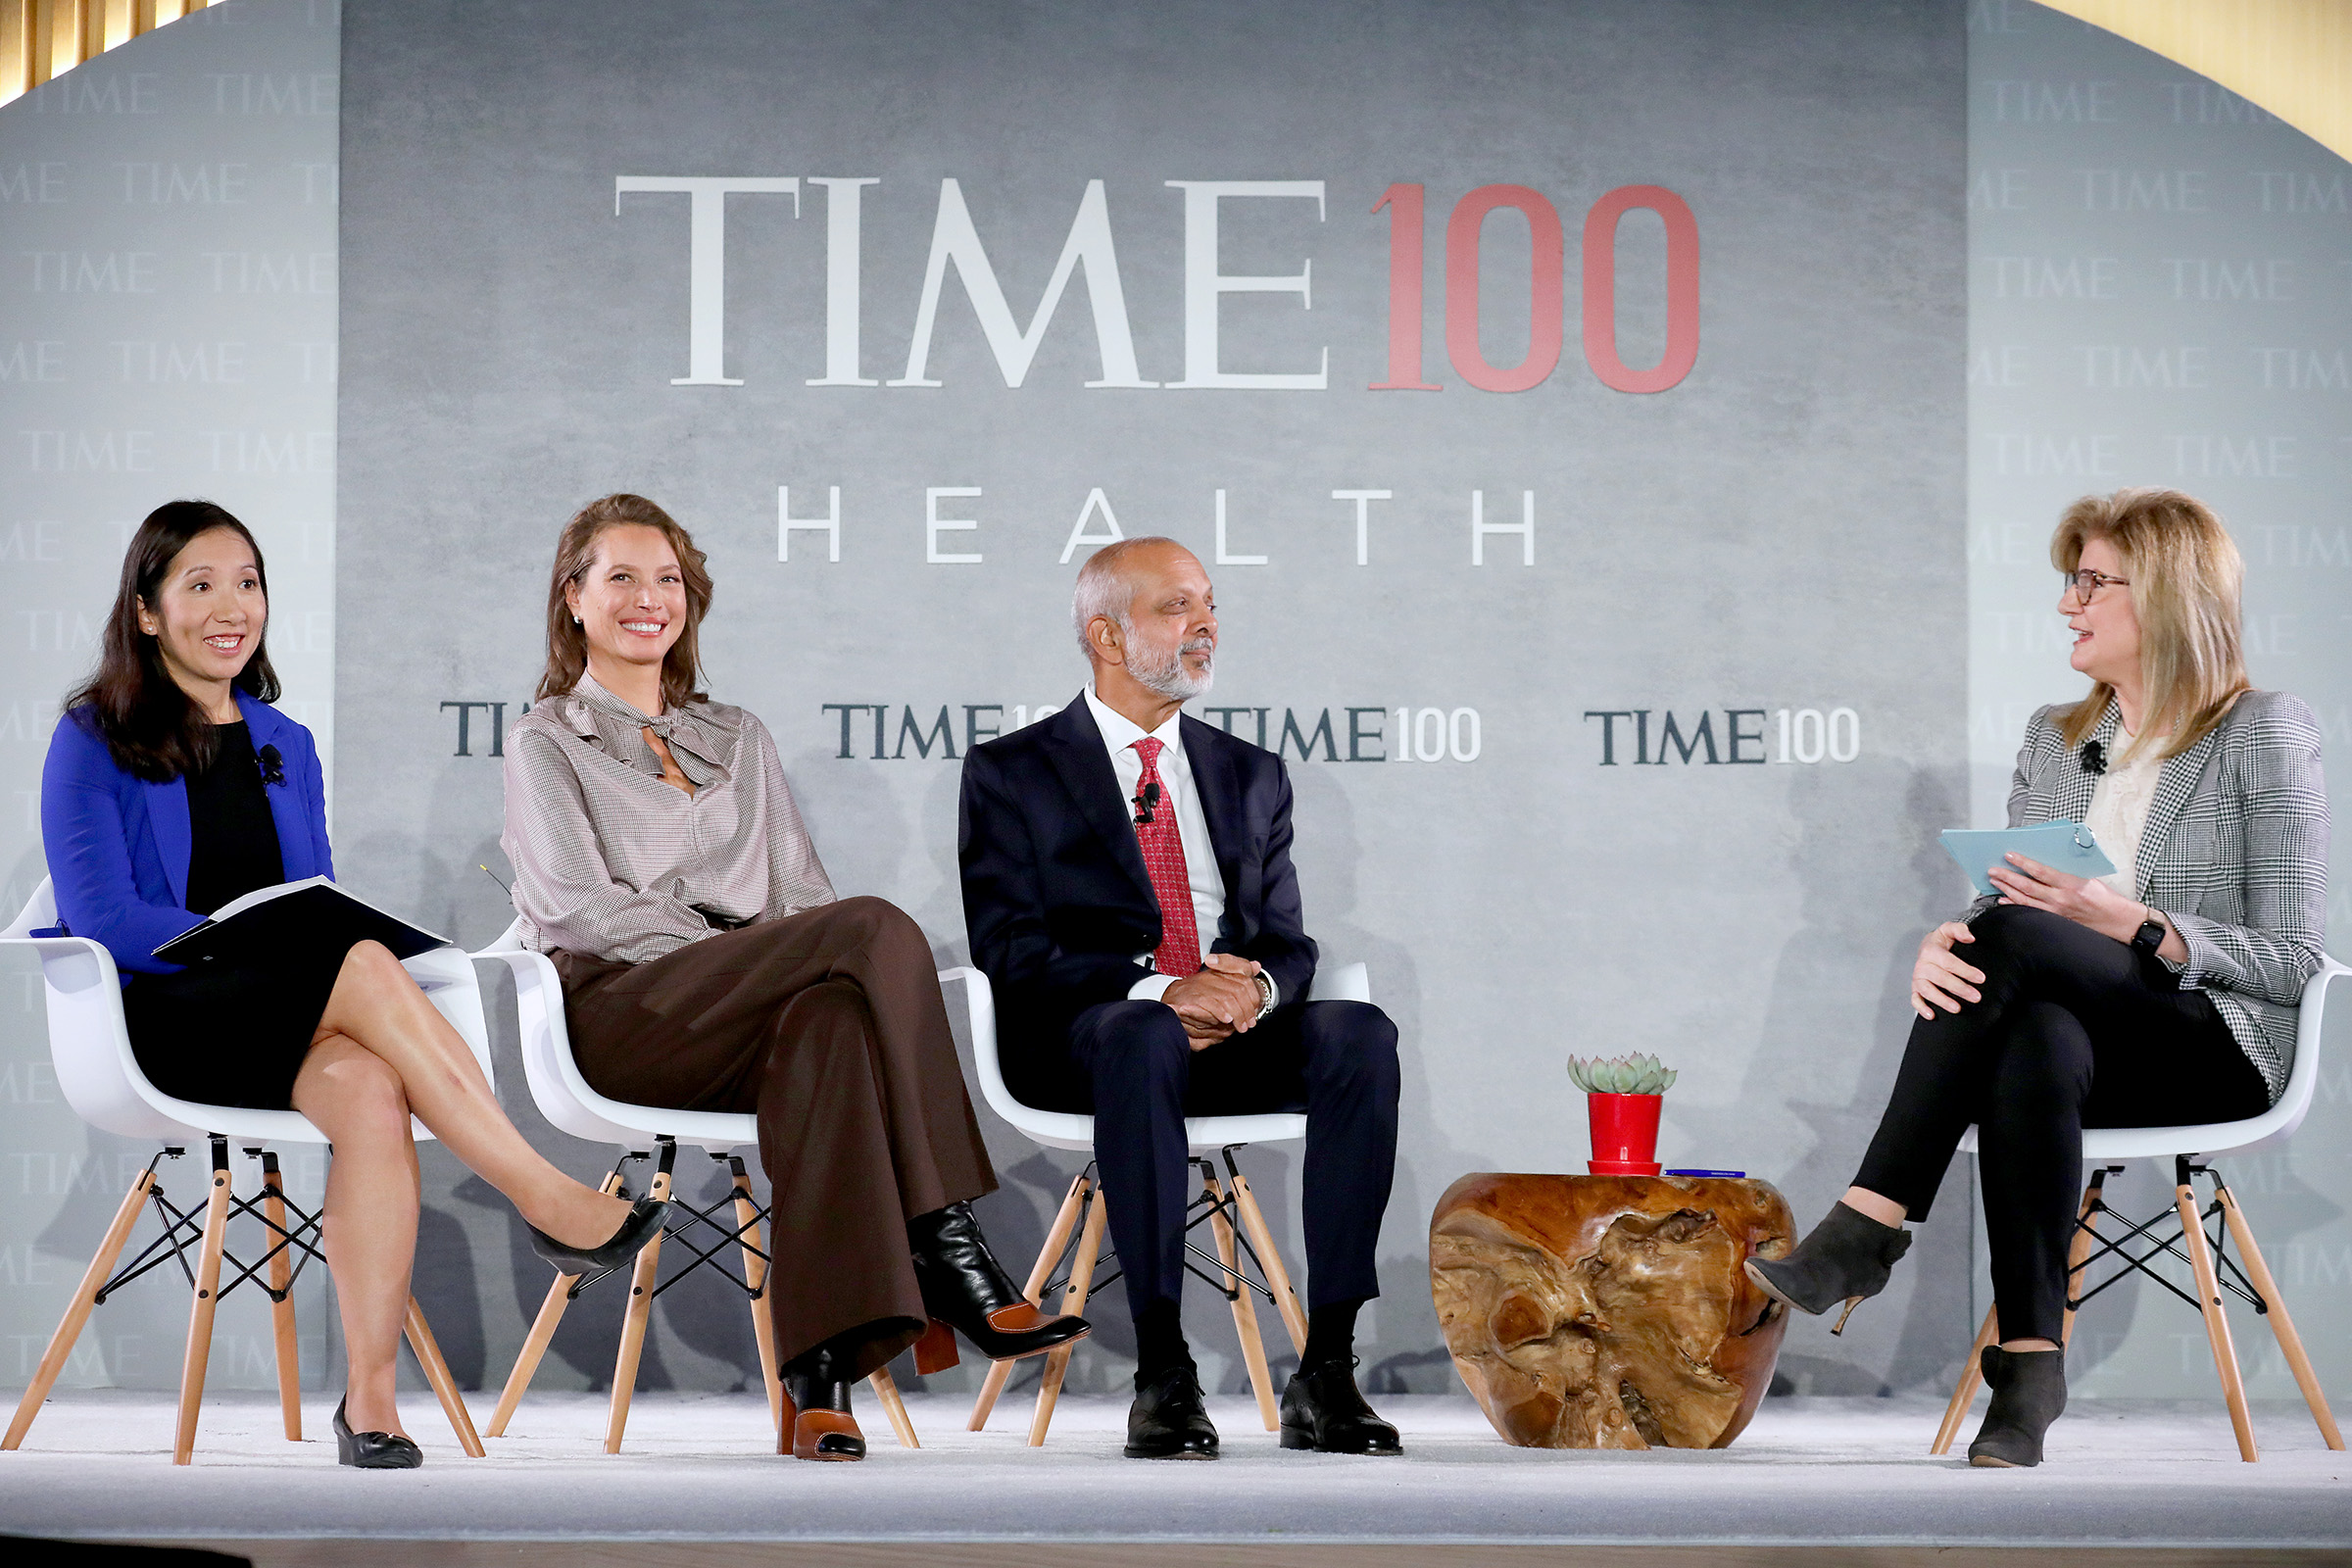 (L-R) Dr. Leana Wen, Christy Turlington Burns, Dr. Naveen Rao and Arianna Huffington speak onstage during the TIME 100 Health Summit at Pier 17 in New York City on Oct. 17, 2019. (Brian Ach—Getty Images for TIME 100 Health)